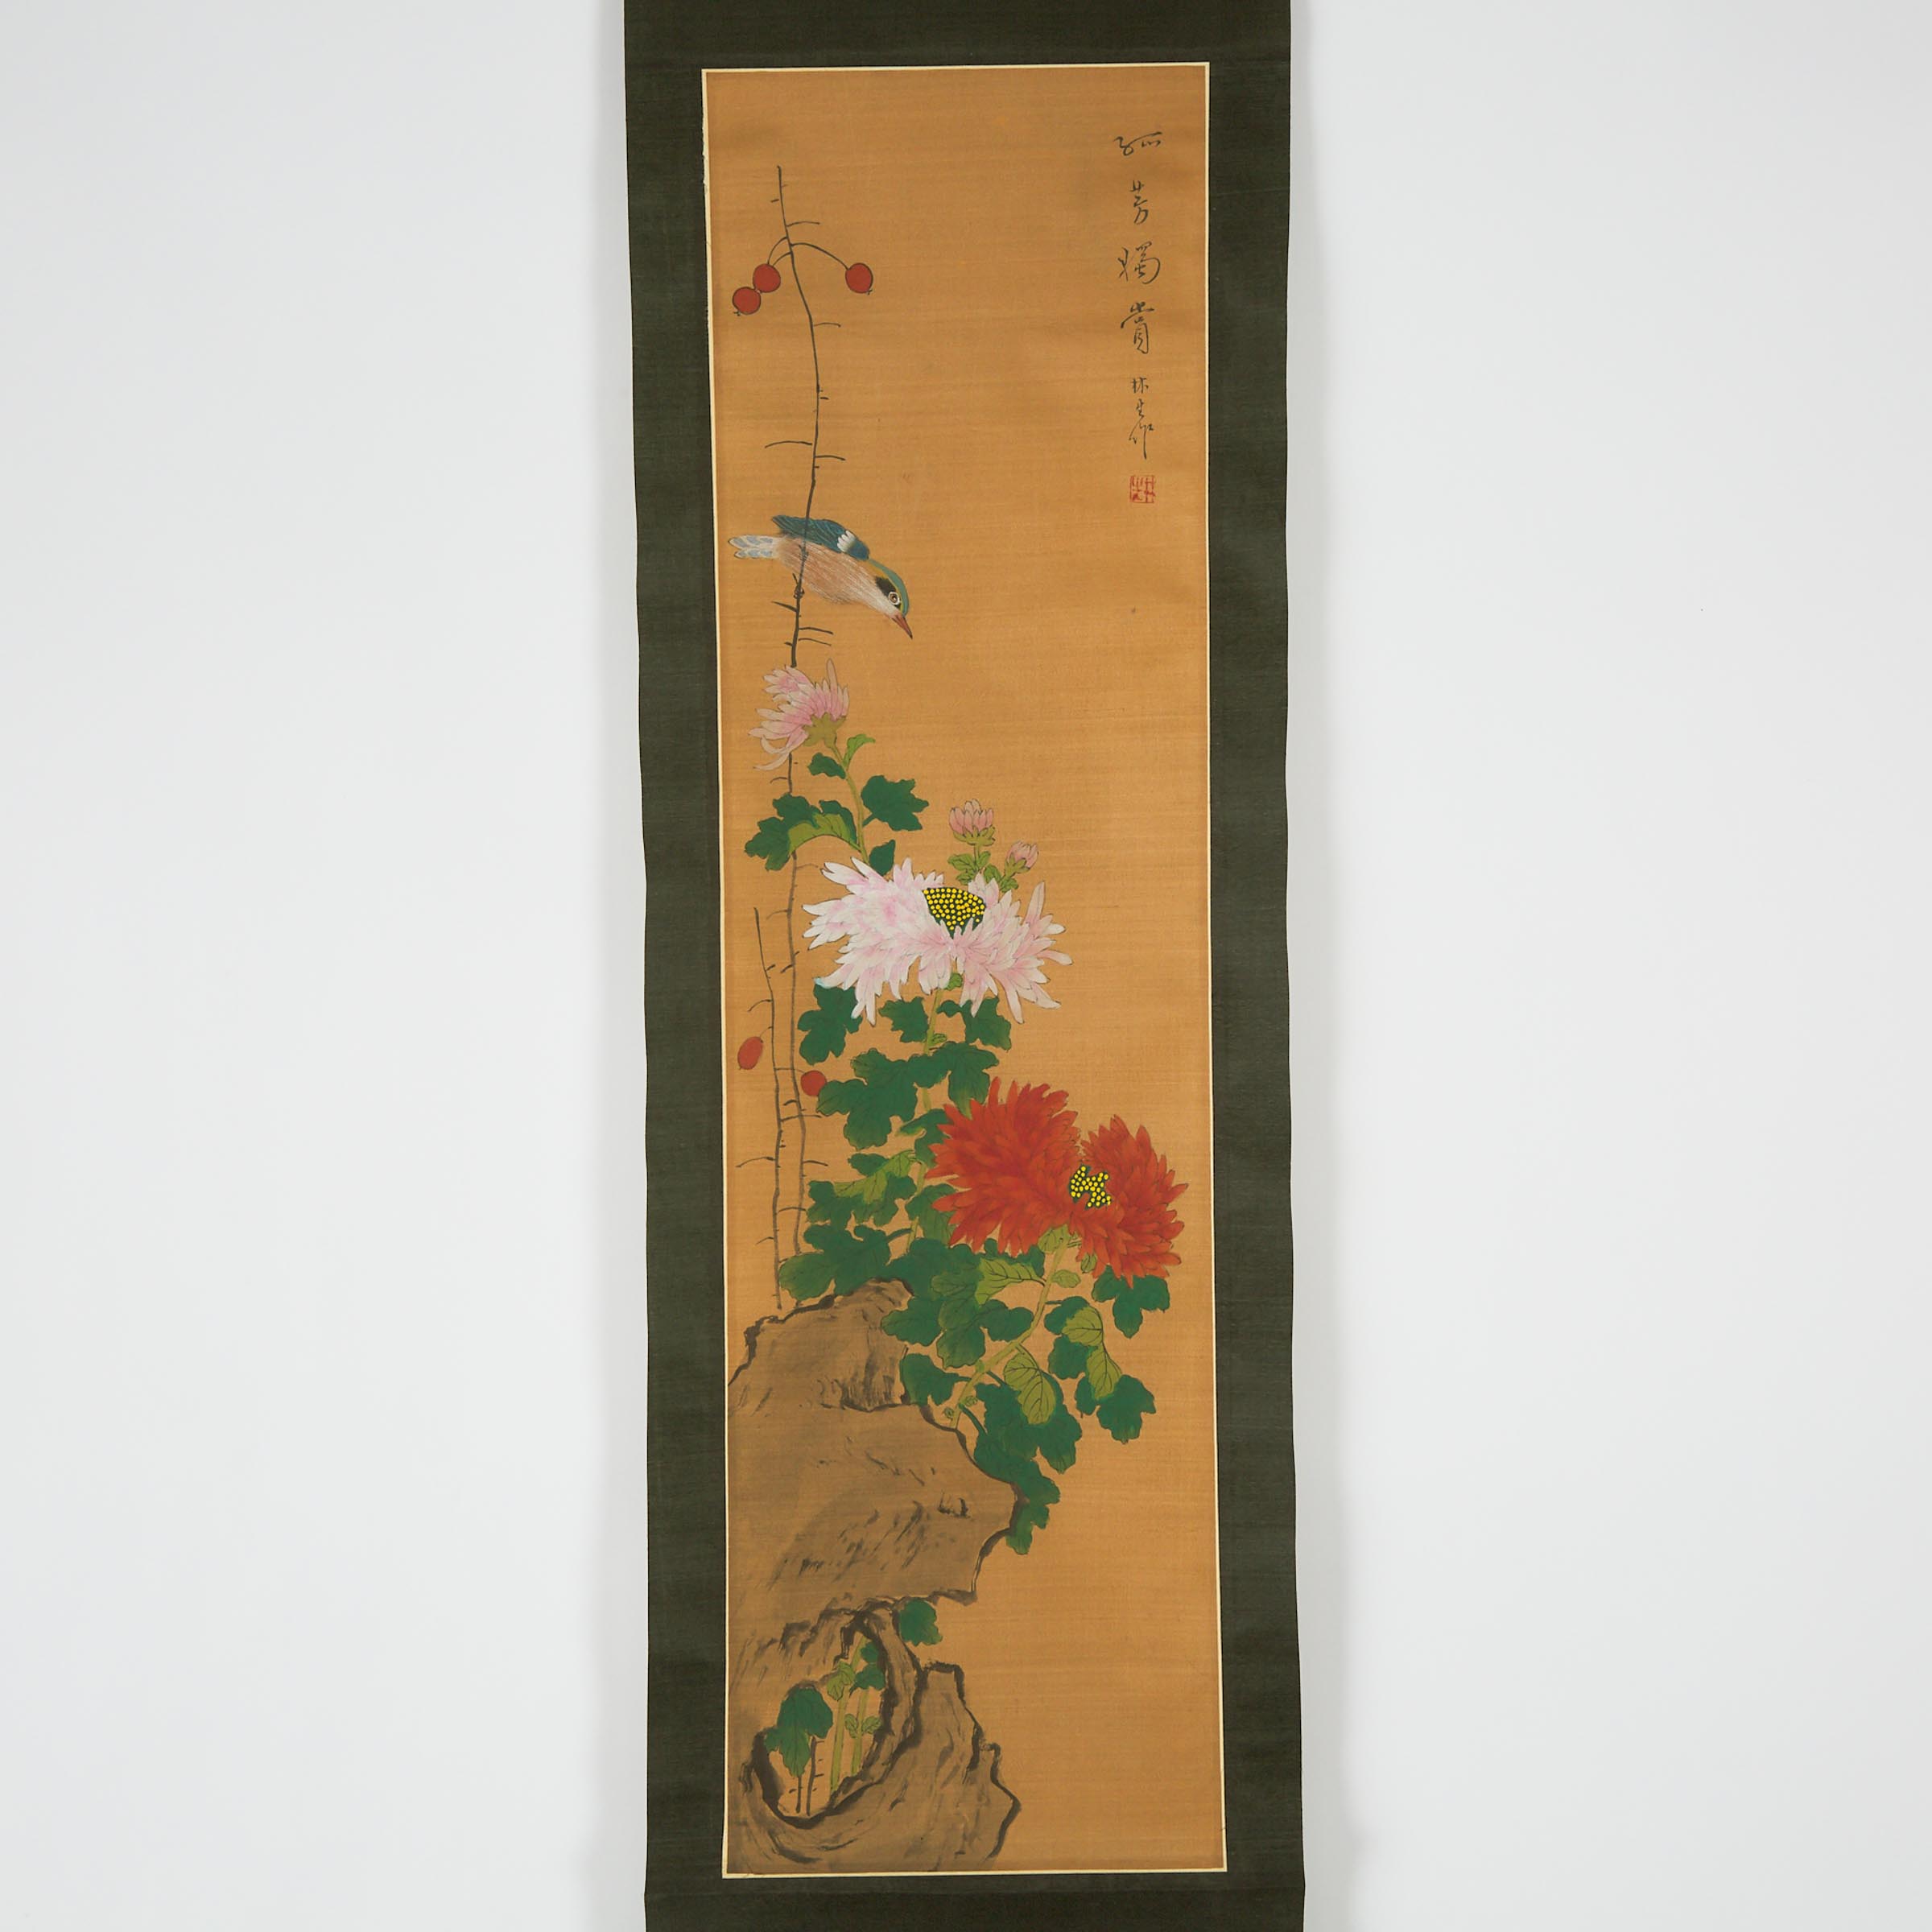 A Set of Four Framed Chinese 'Figural Landscape' Paintings, Together With a Pair of 'Floral' Scroll Paintings